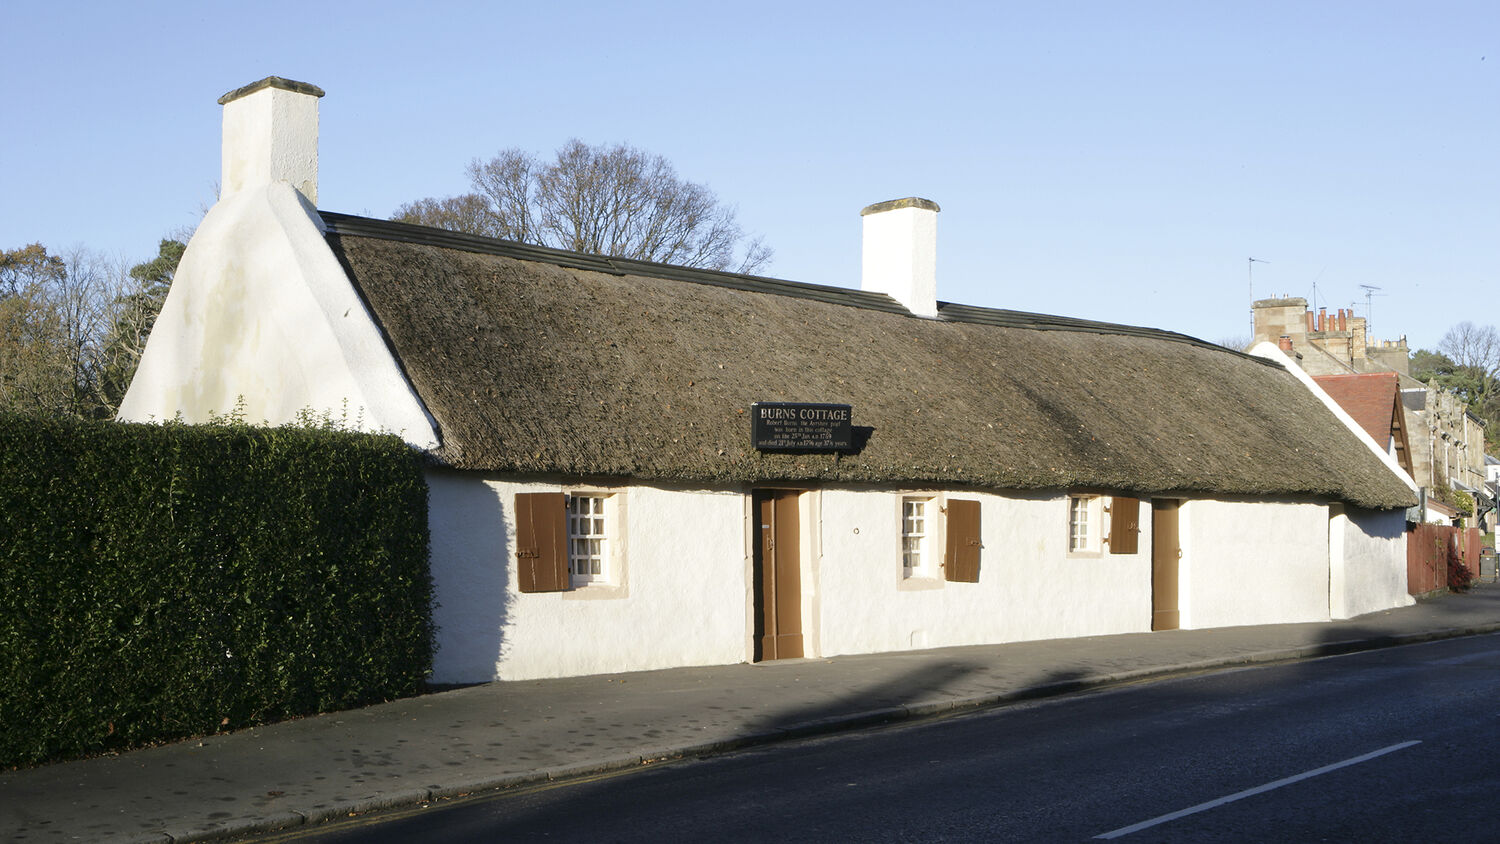 A white thatched cottage stands on the side of a road with a blue sky background.